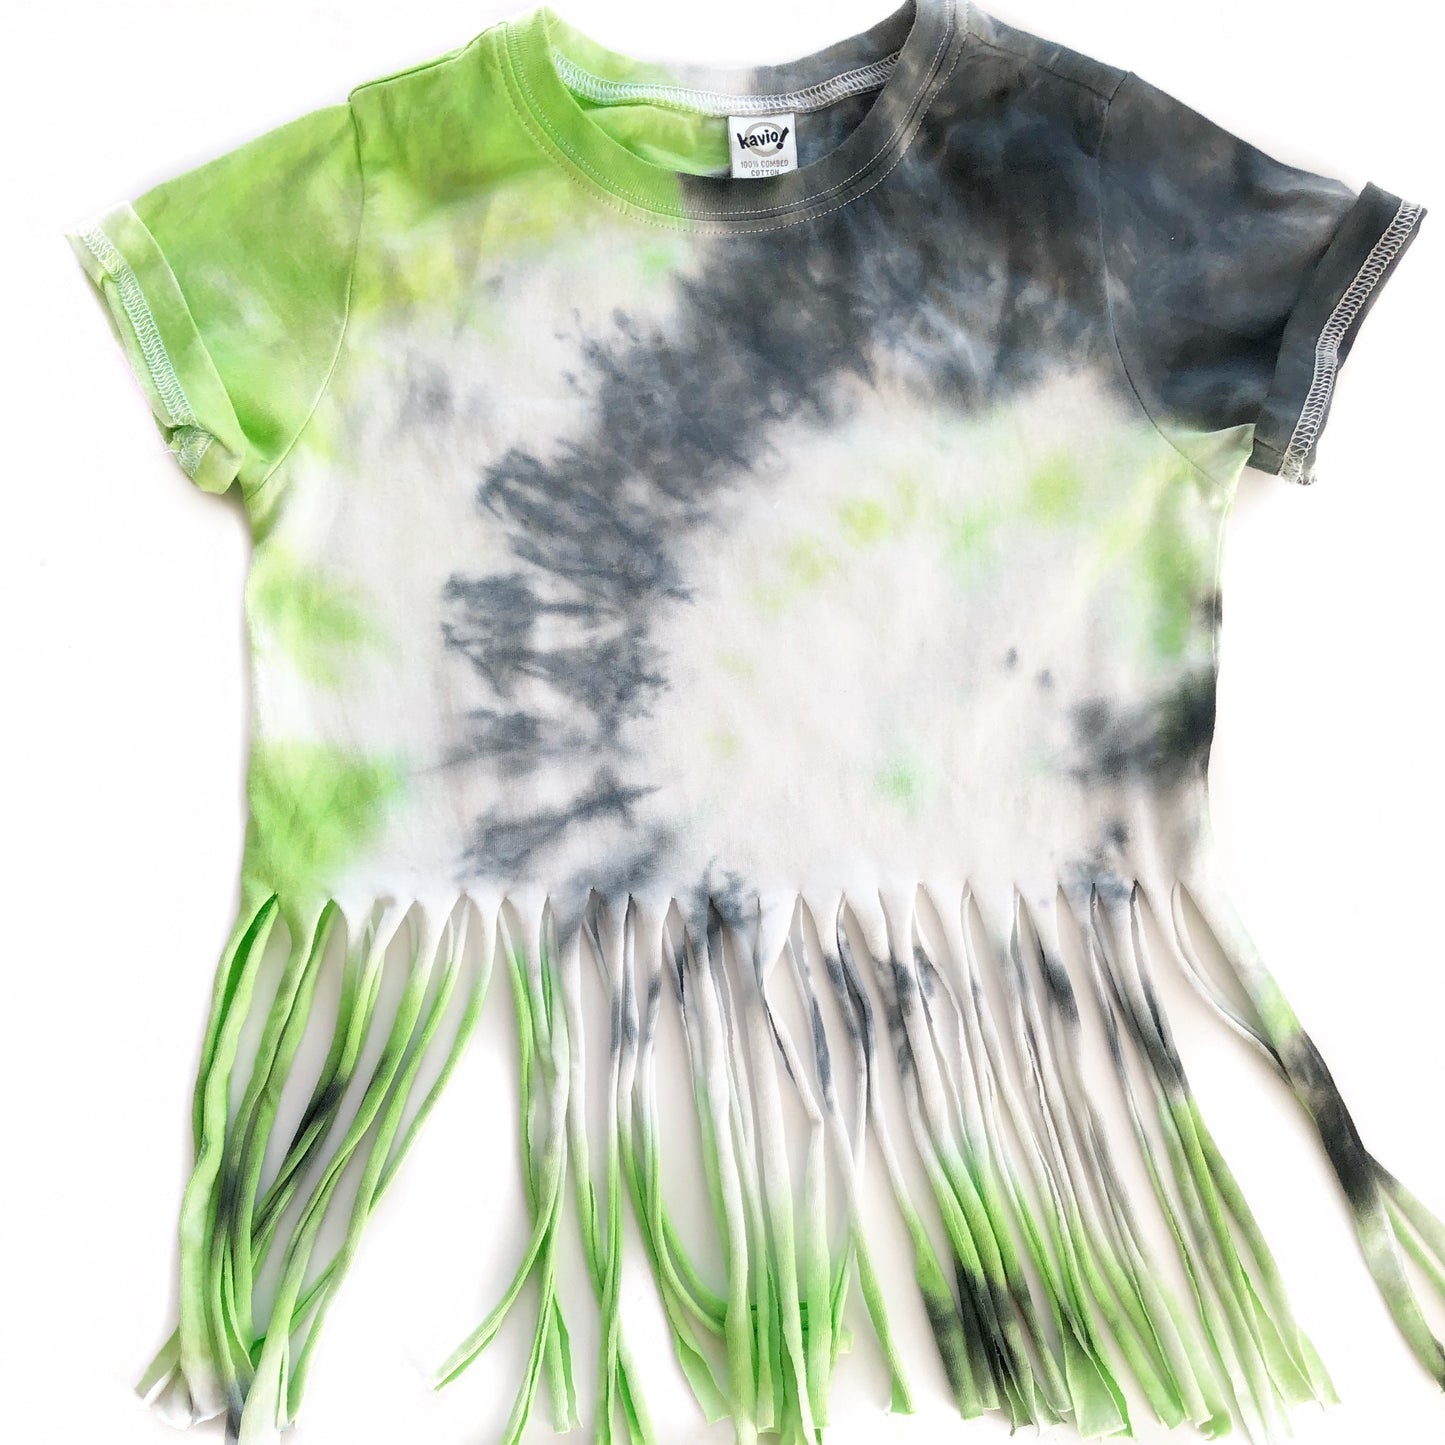 Out of This World Tie-Dye T-shirt